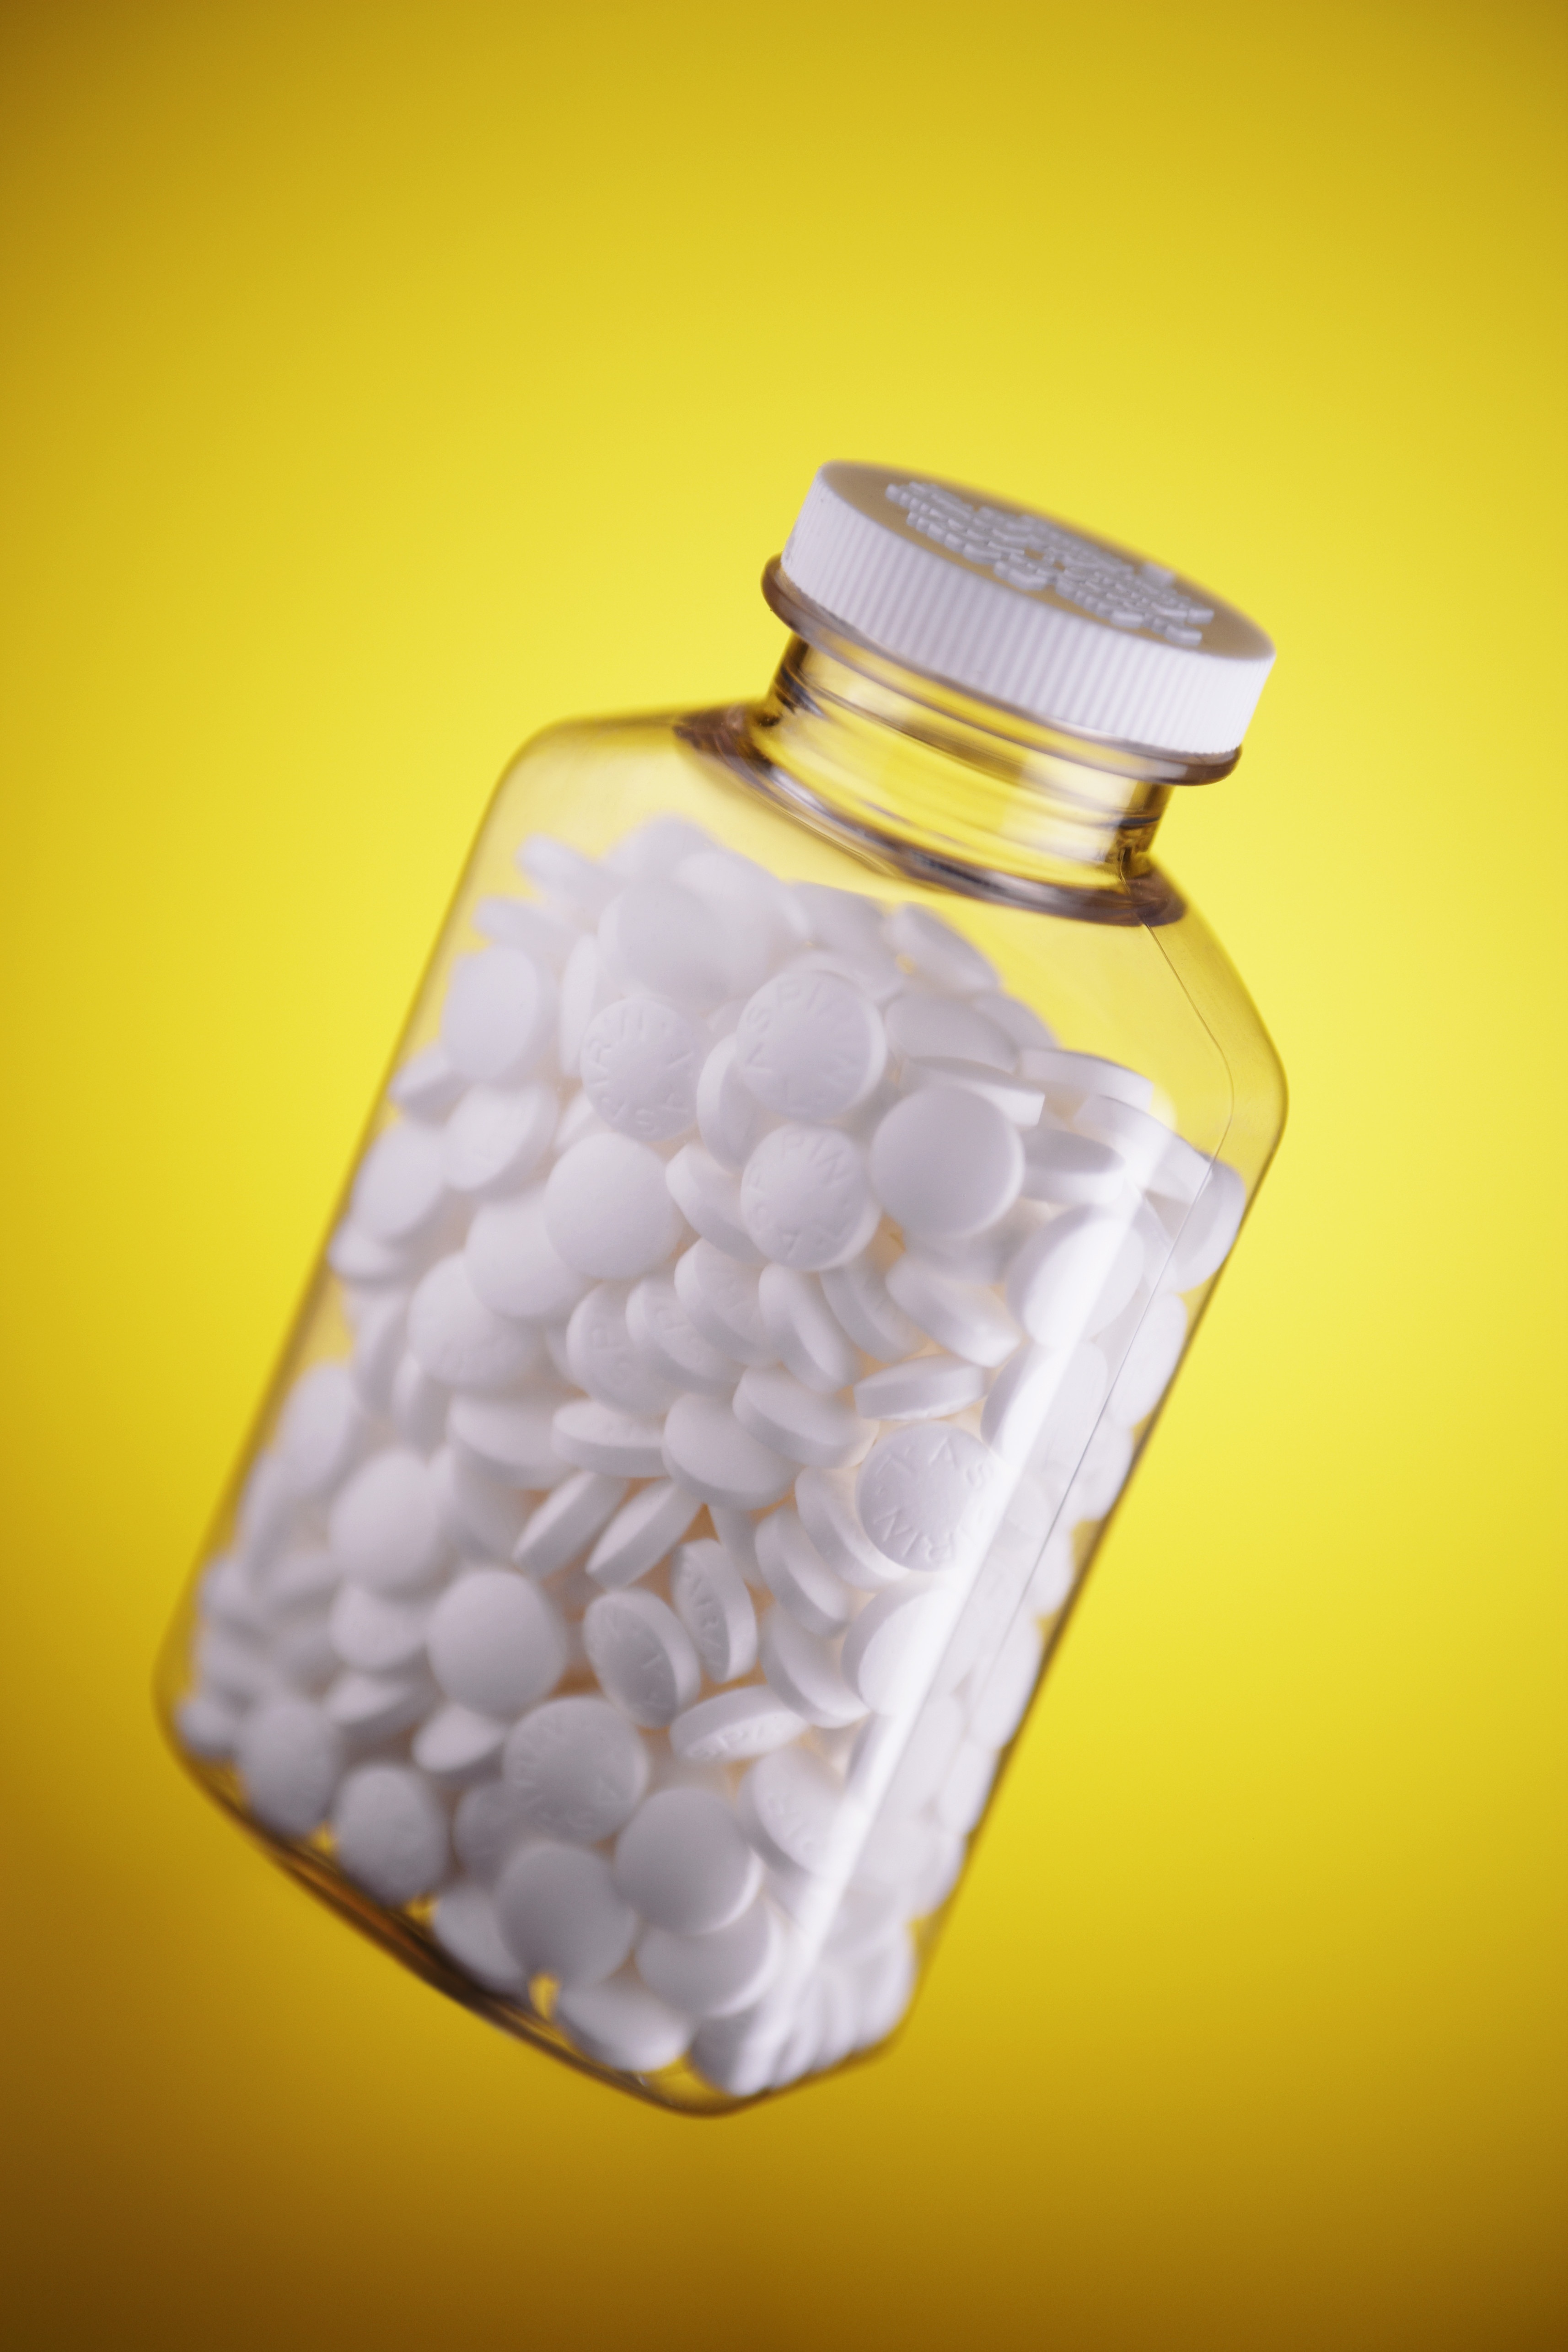 90-day Post-Stenting Aspirin Cessation Not Linked with Mortality Risk Increase